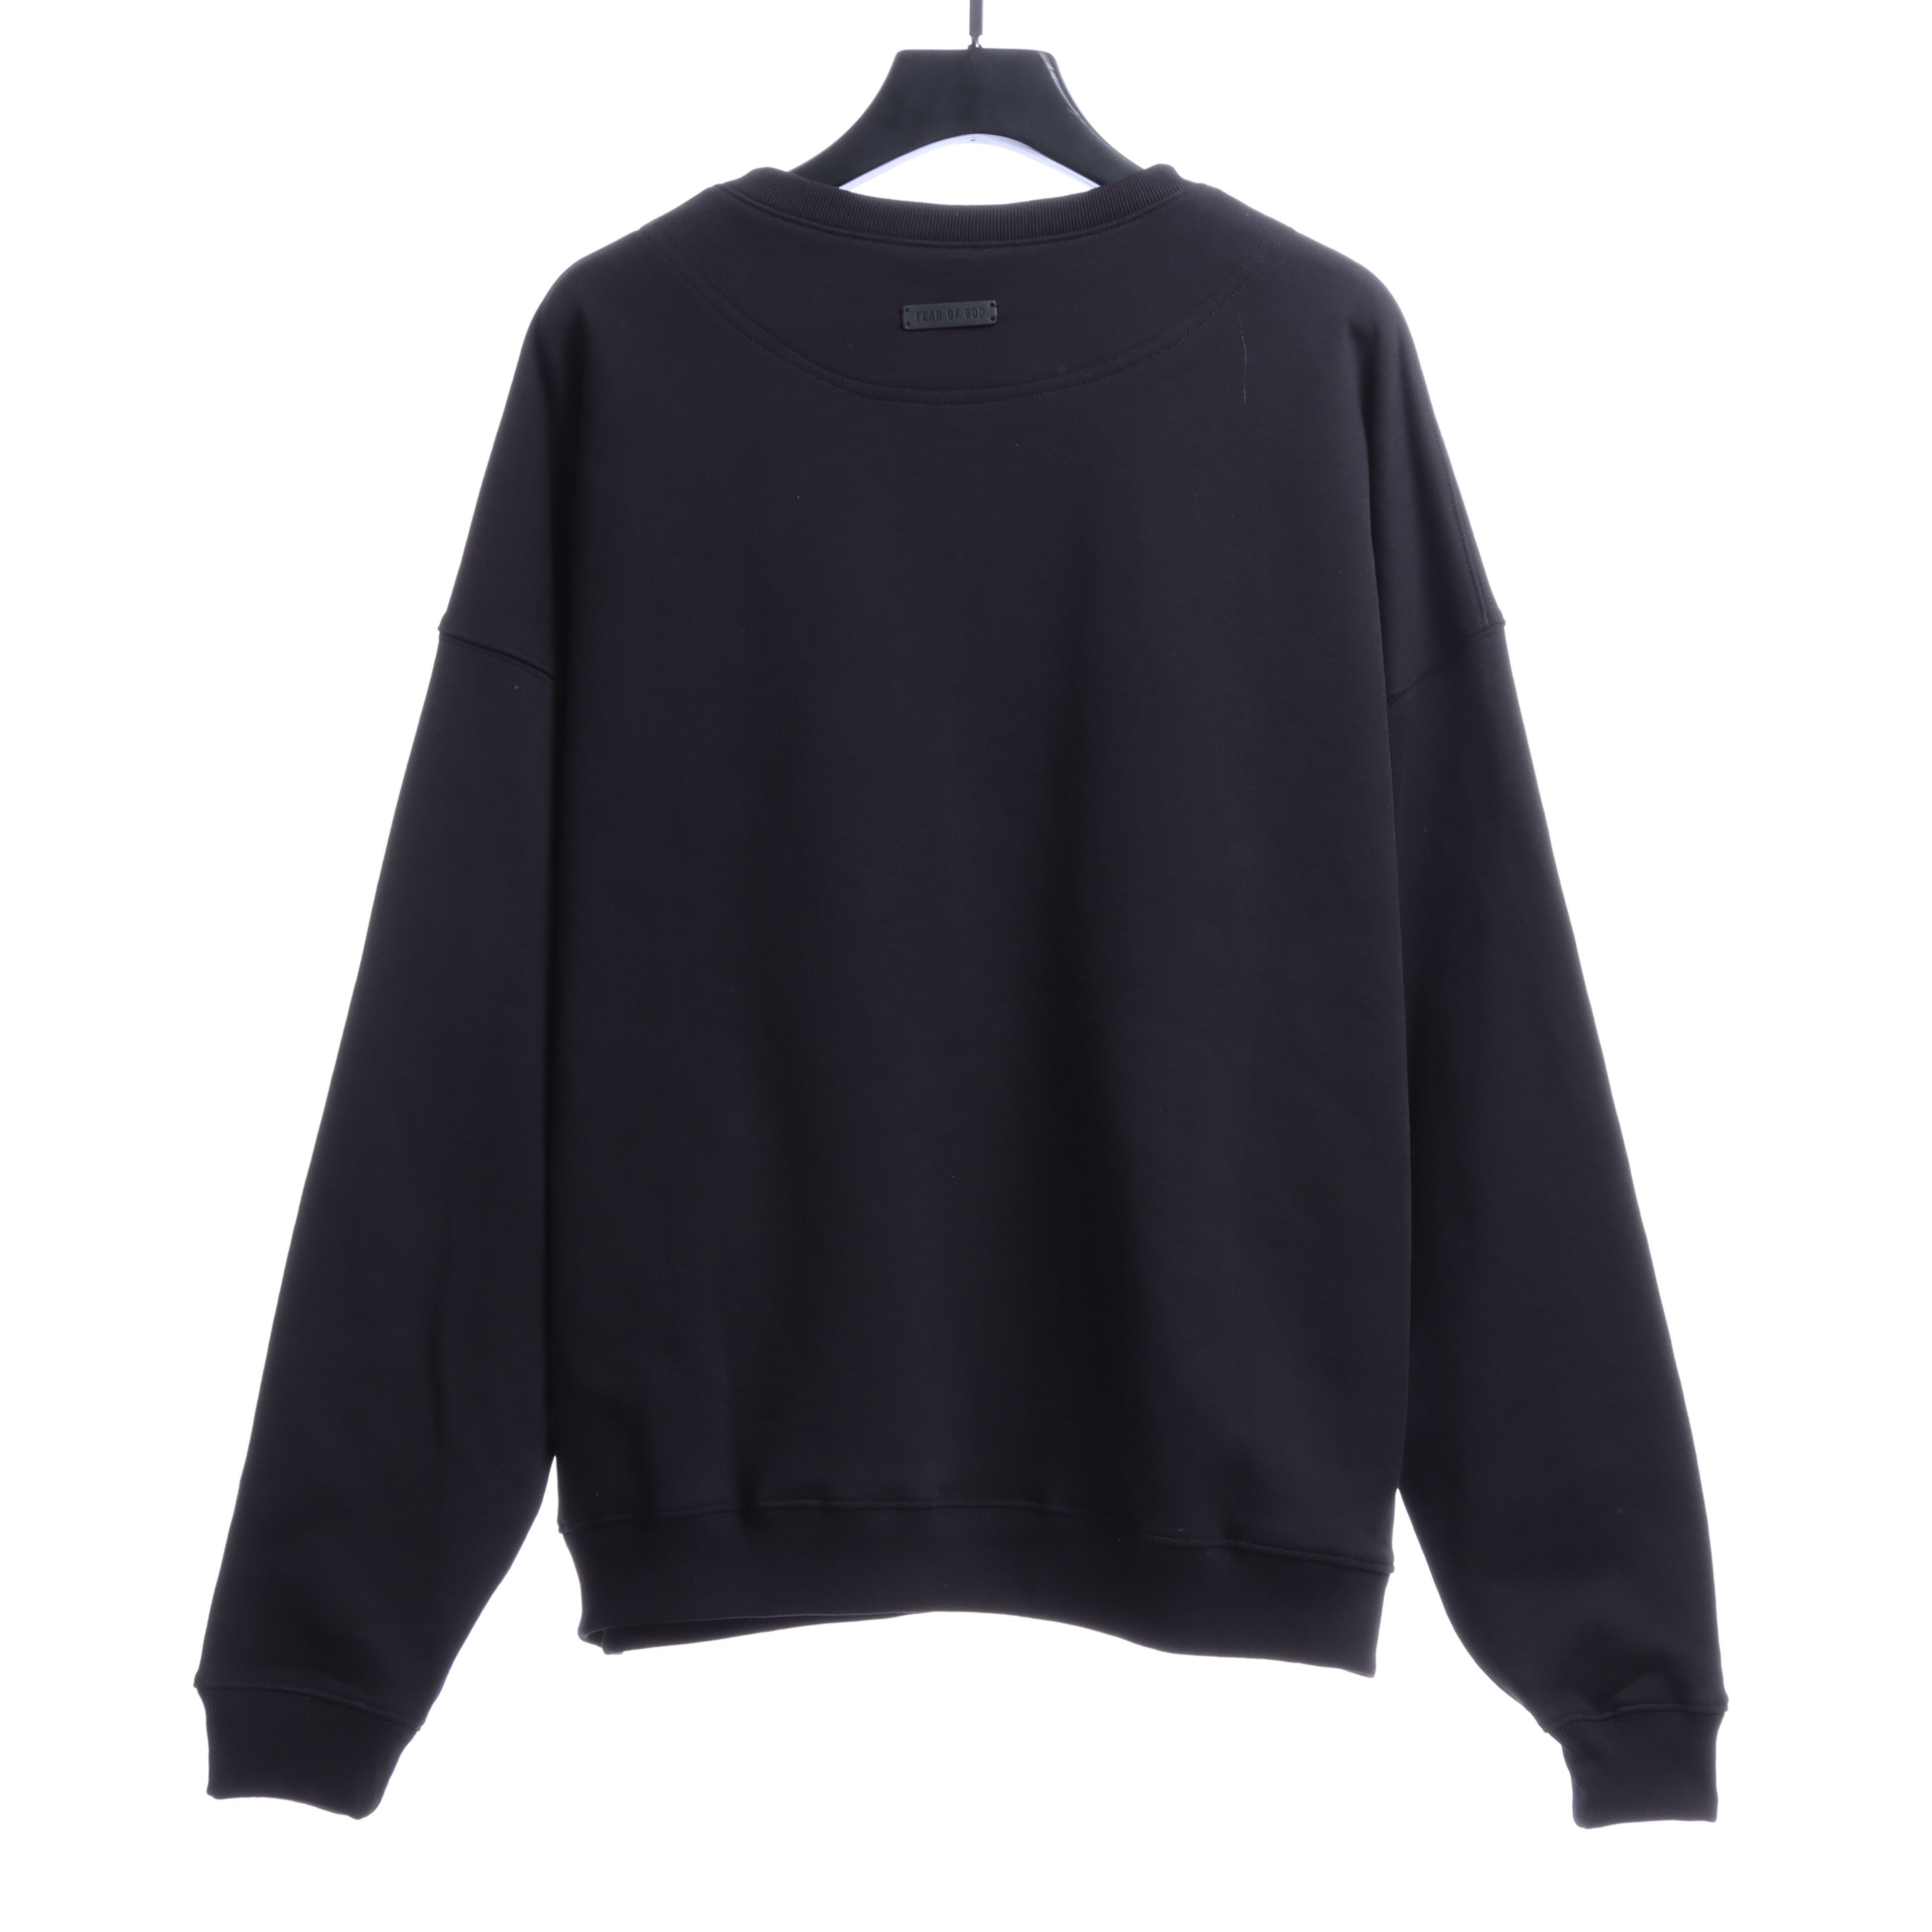 Top Quality Fear of God Flocking Printed Round-Neck Sweater(Free Shipping)